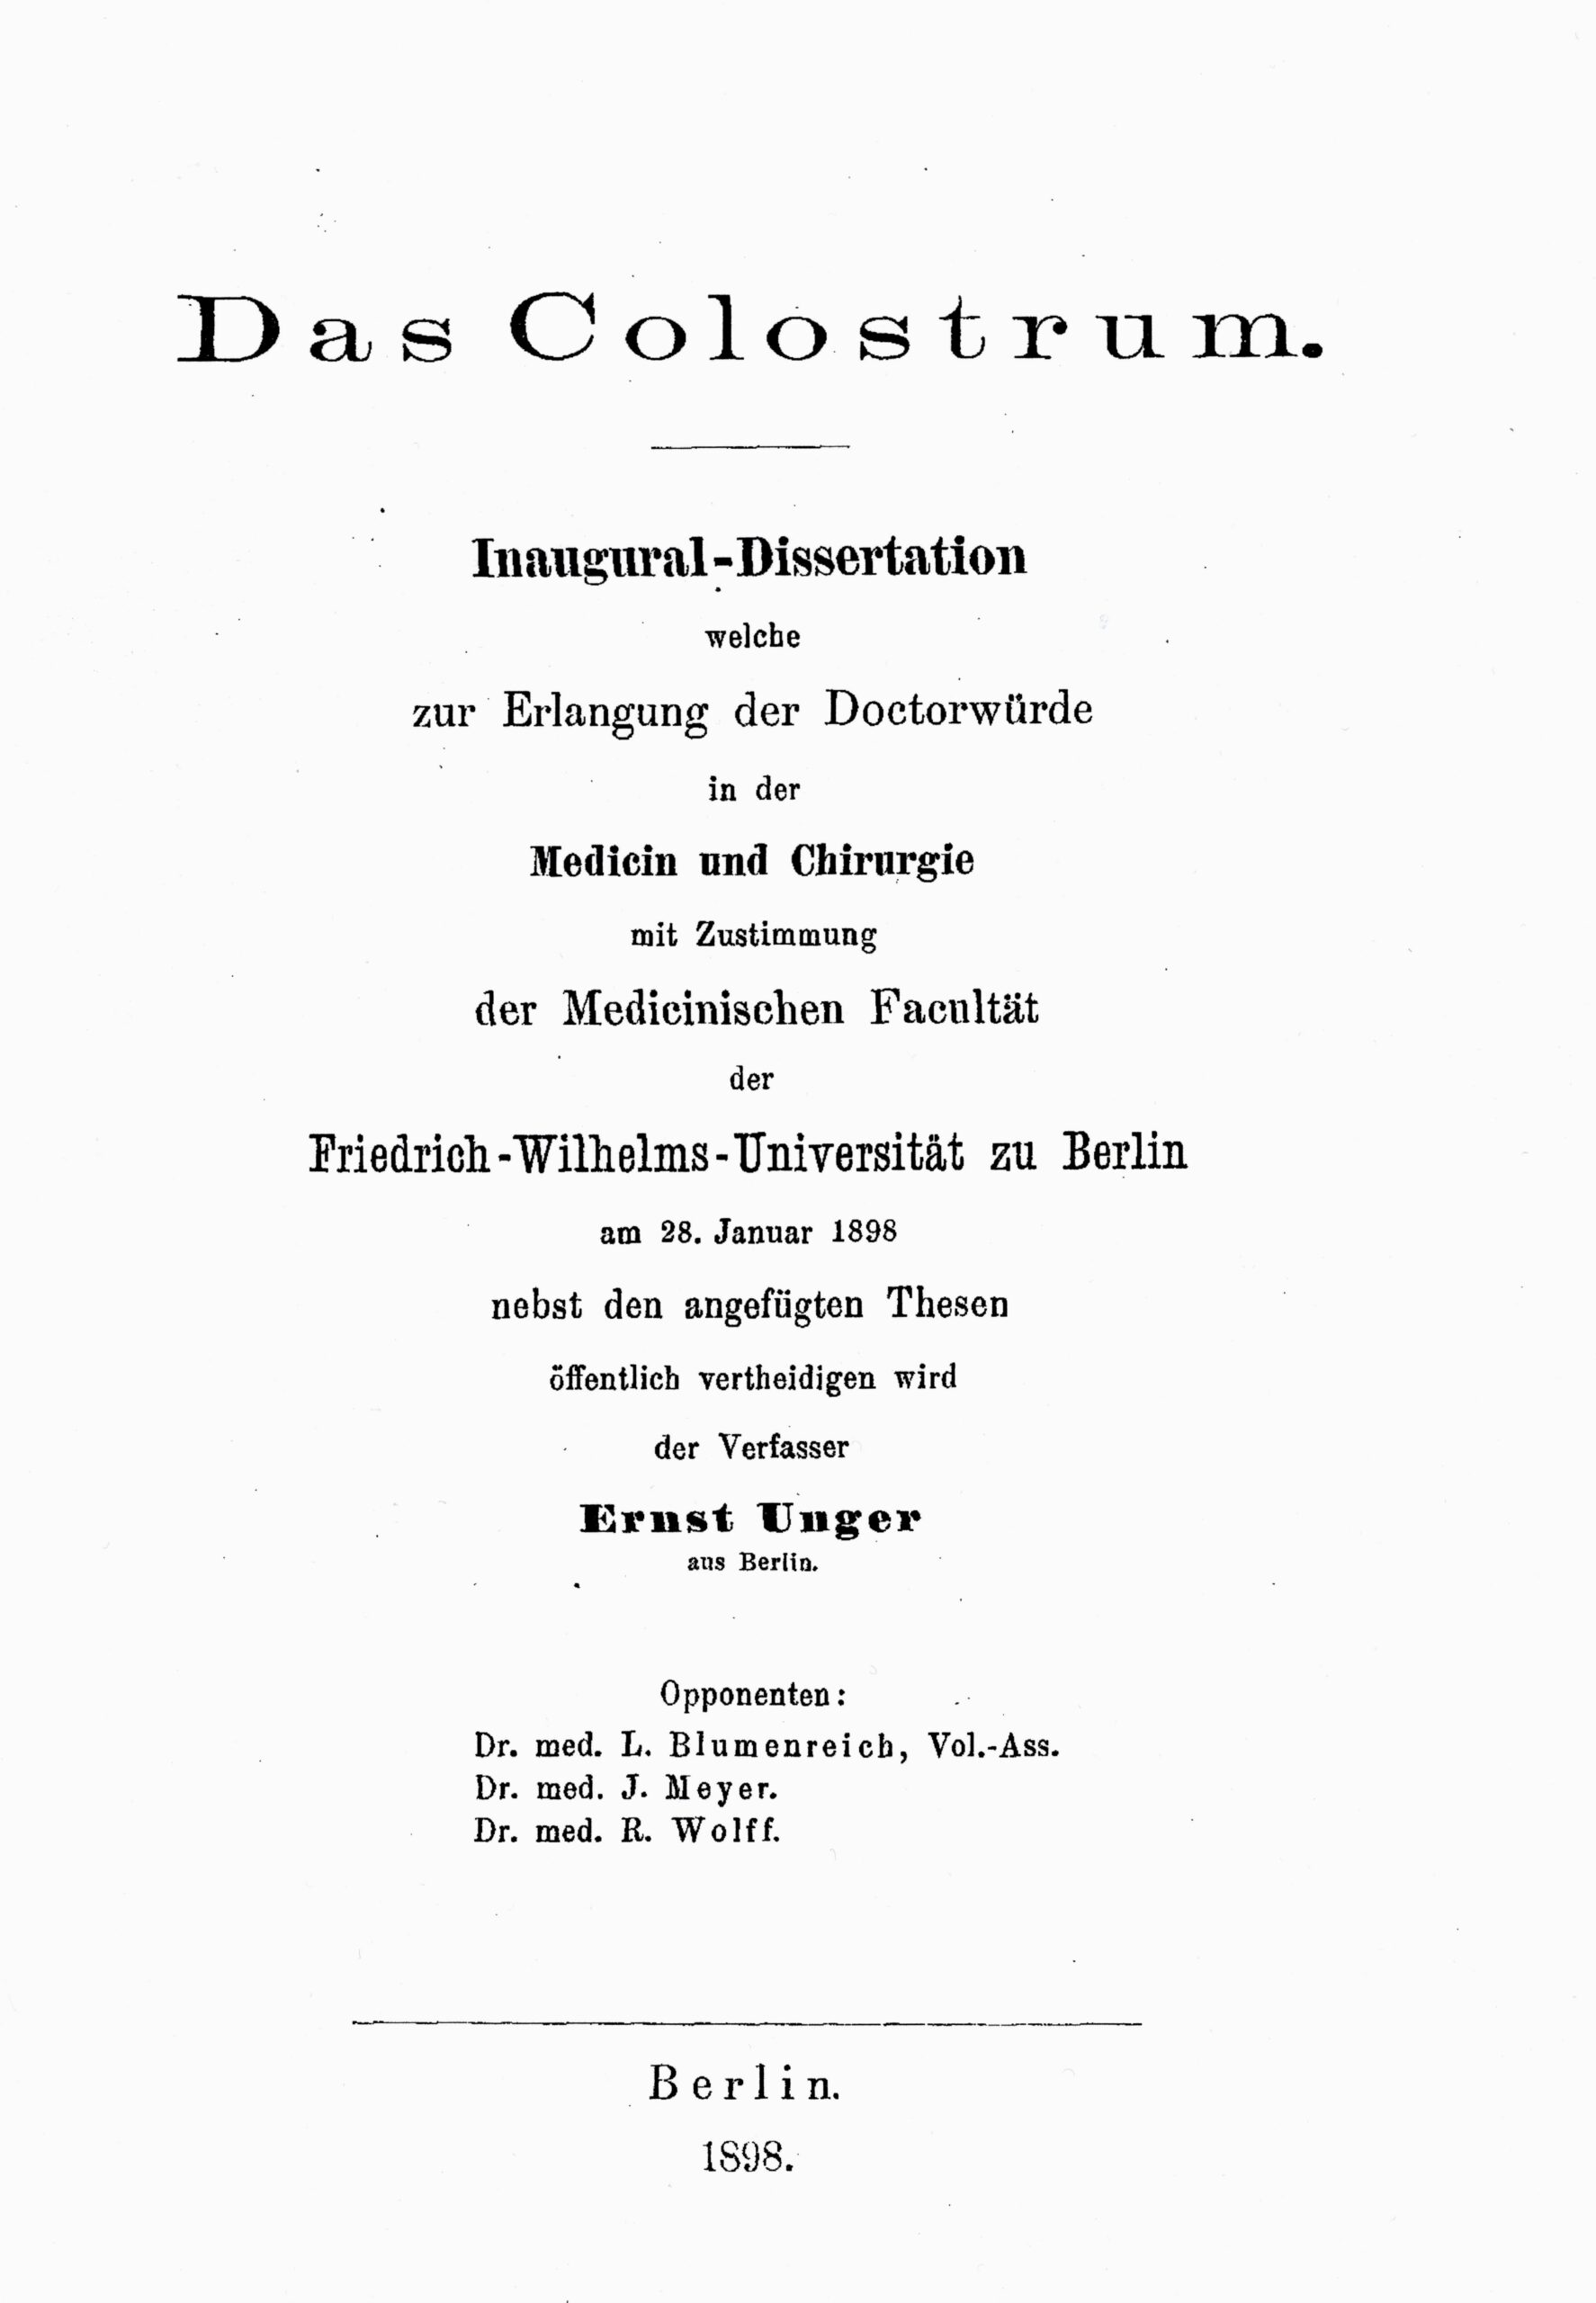 Dissertation, Berlin 1898, copy of the title page, Archive H Je